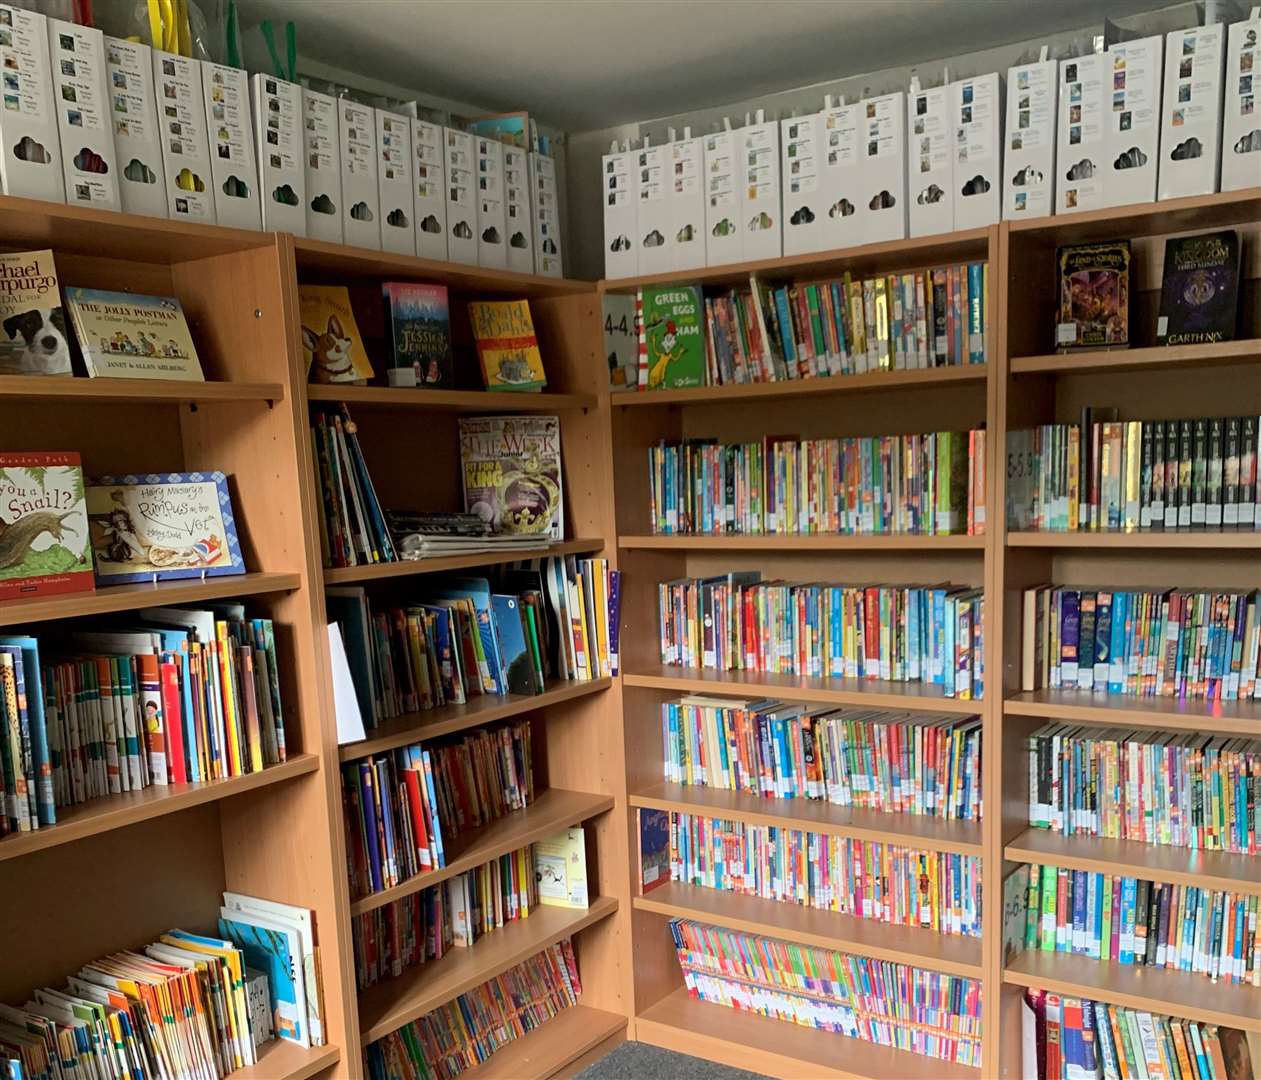 The school's new library includes a number of new books